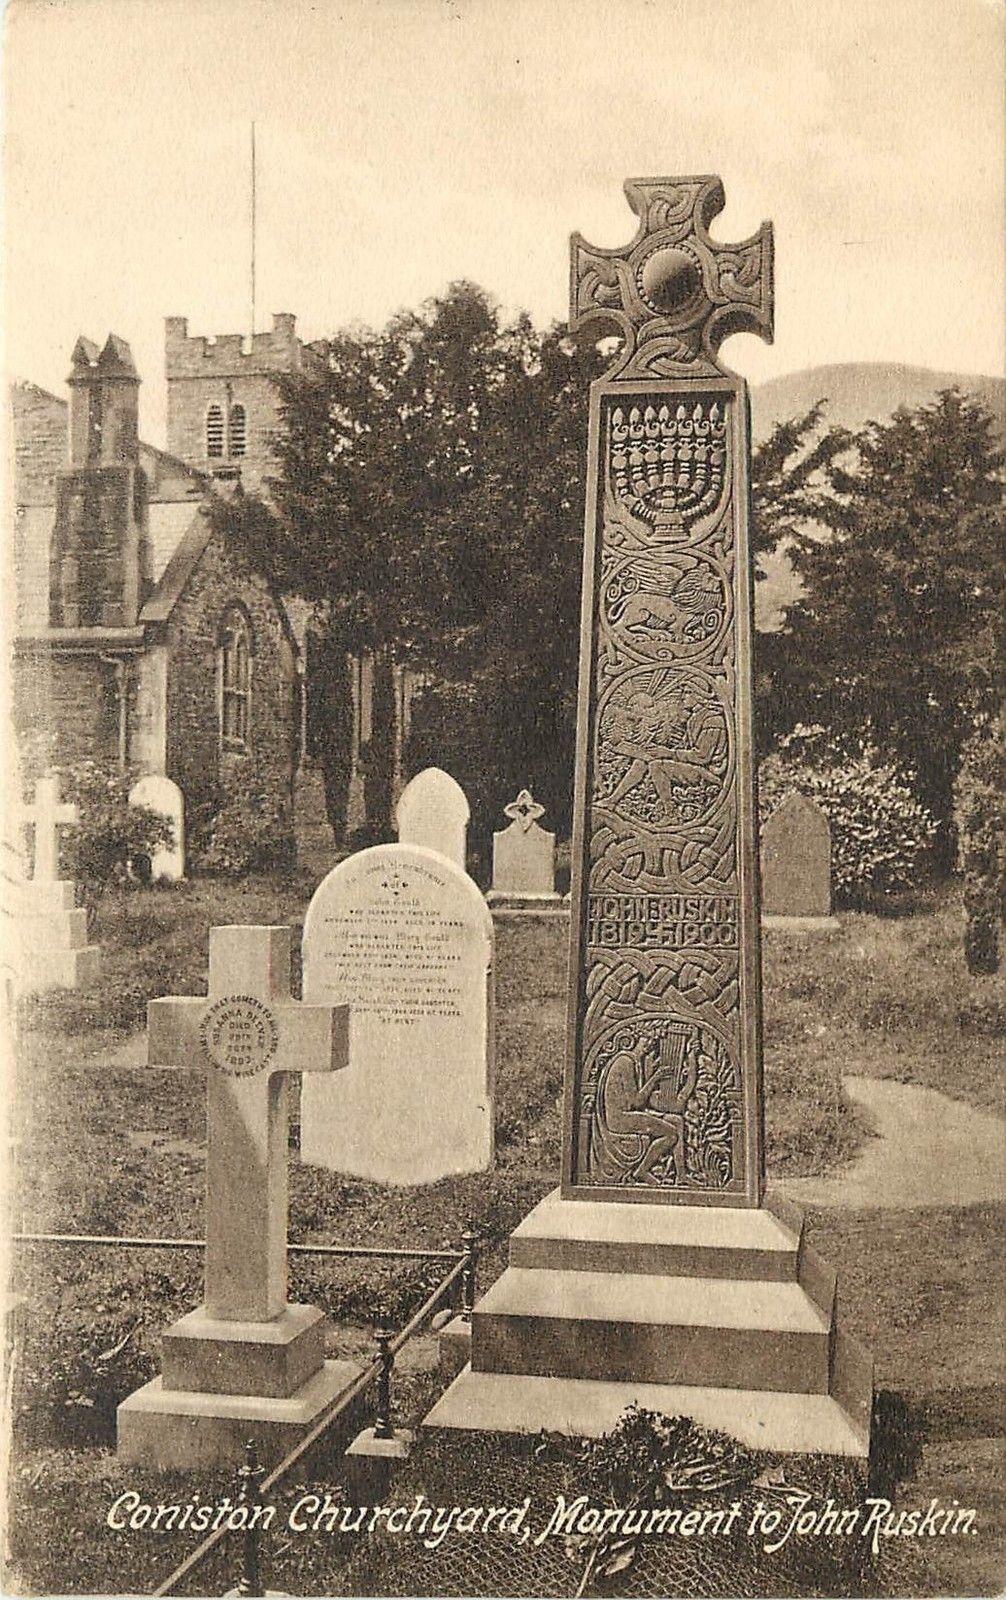 Vintage postage card showing the grave of John Ruskin.